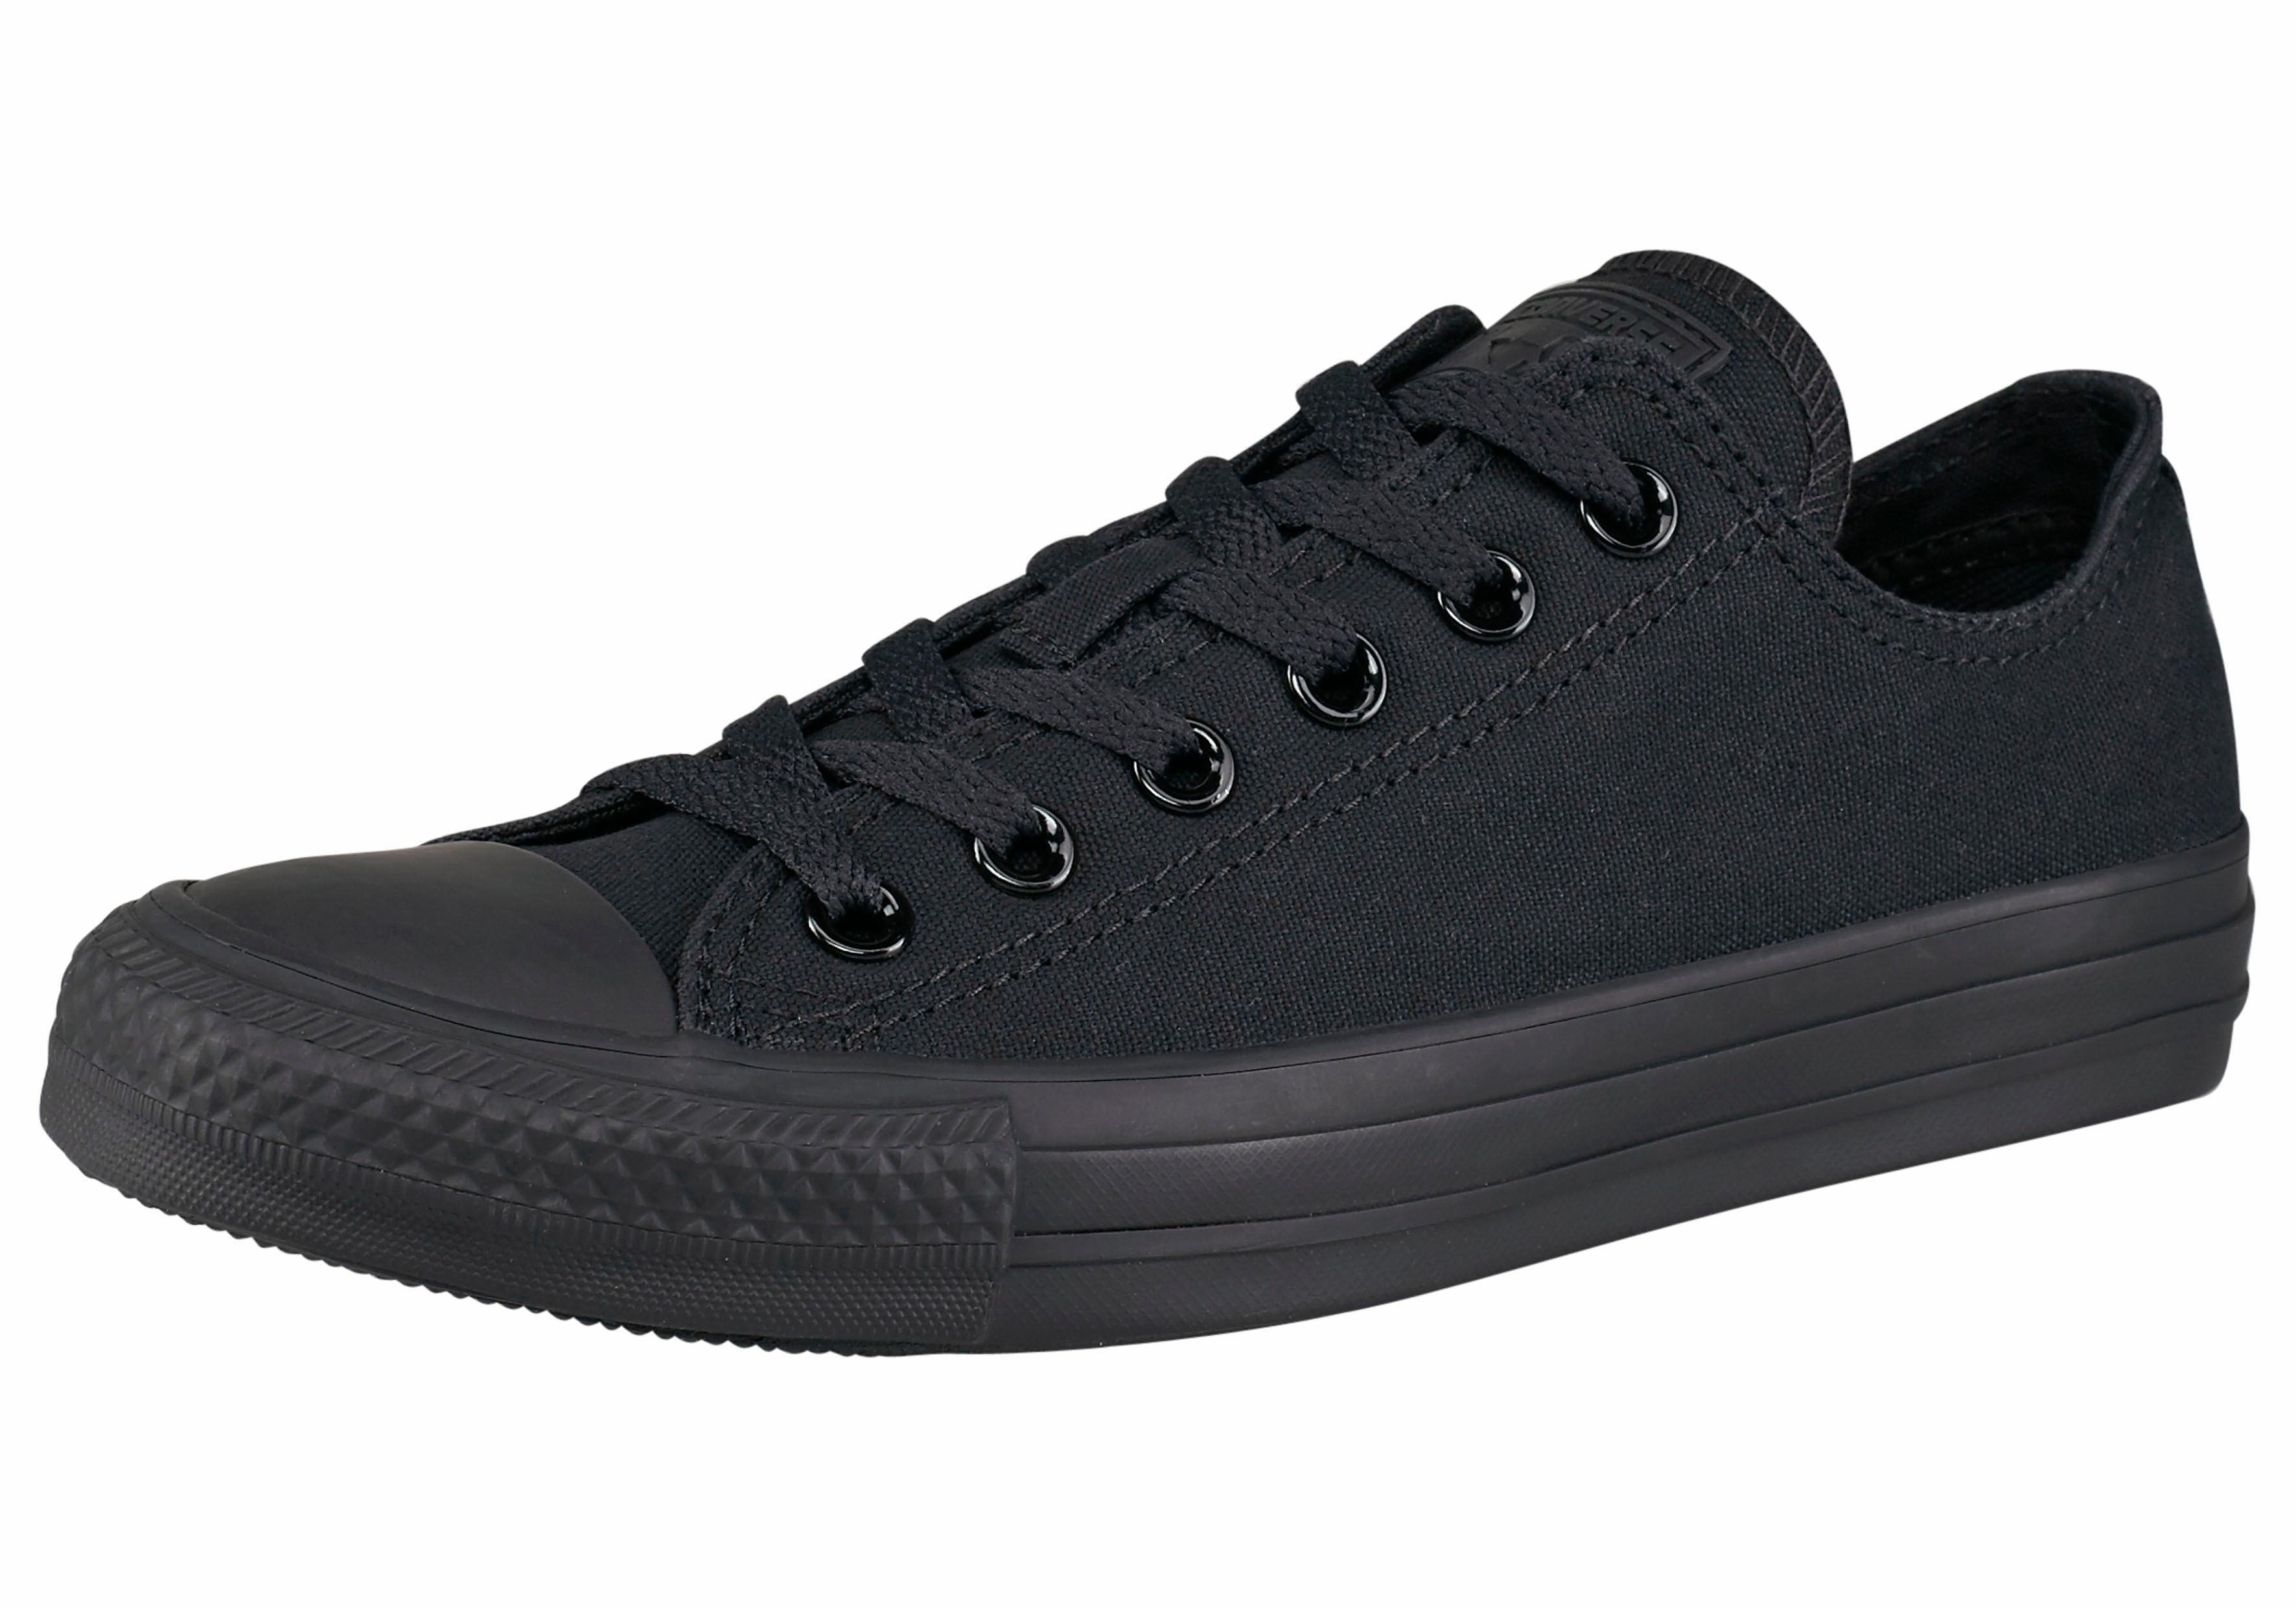 Converse-sneakers, 'All Star Ox'